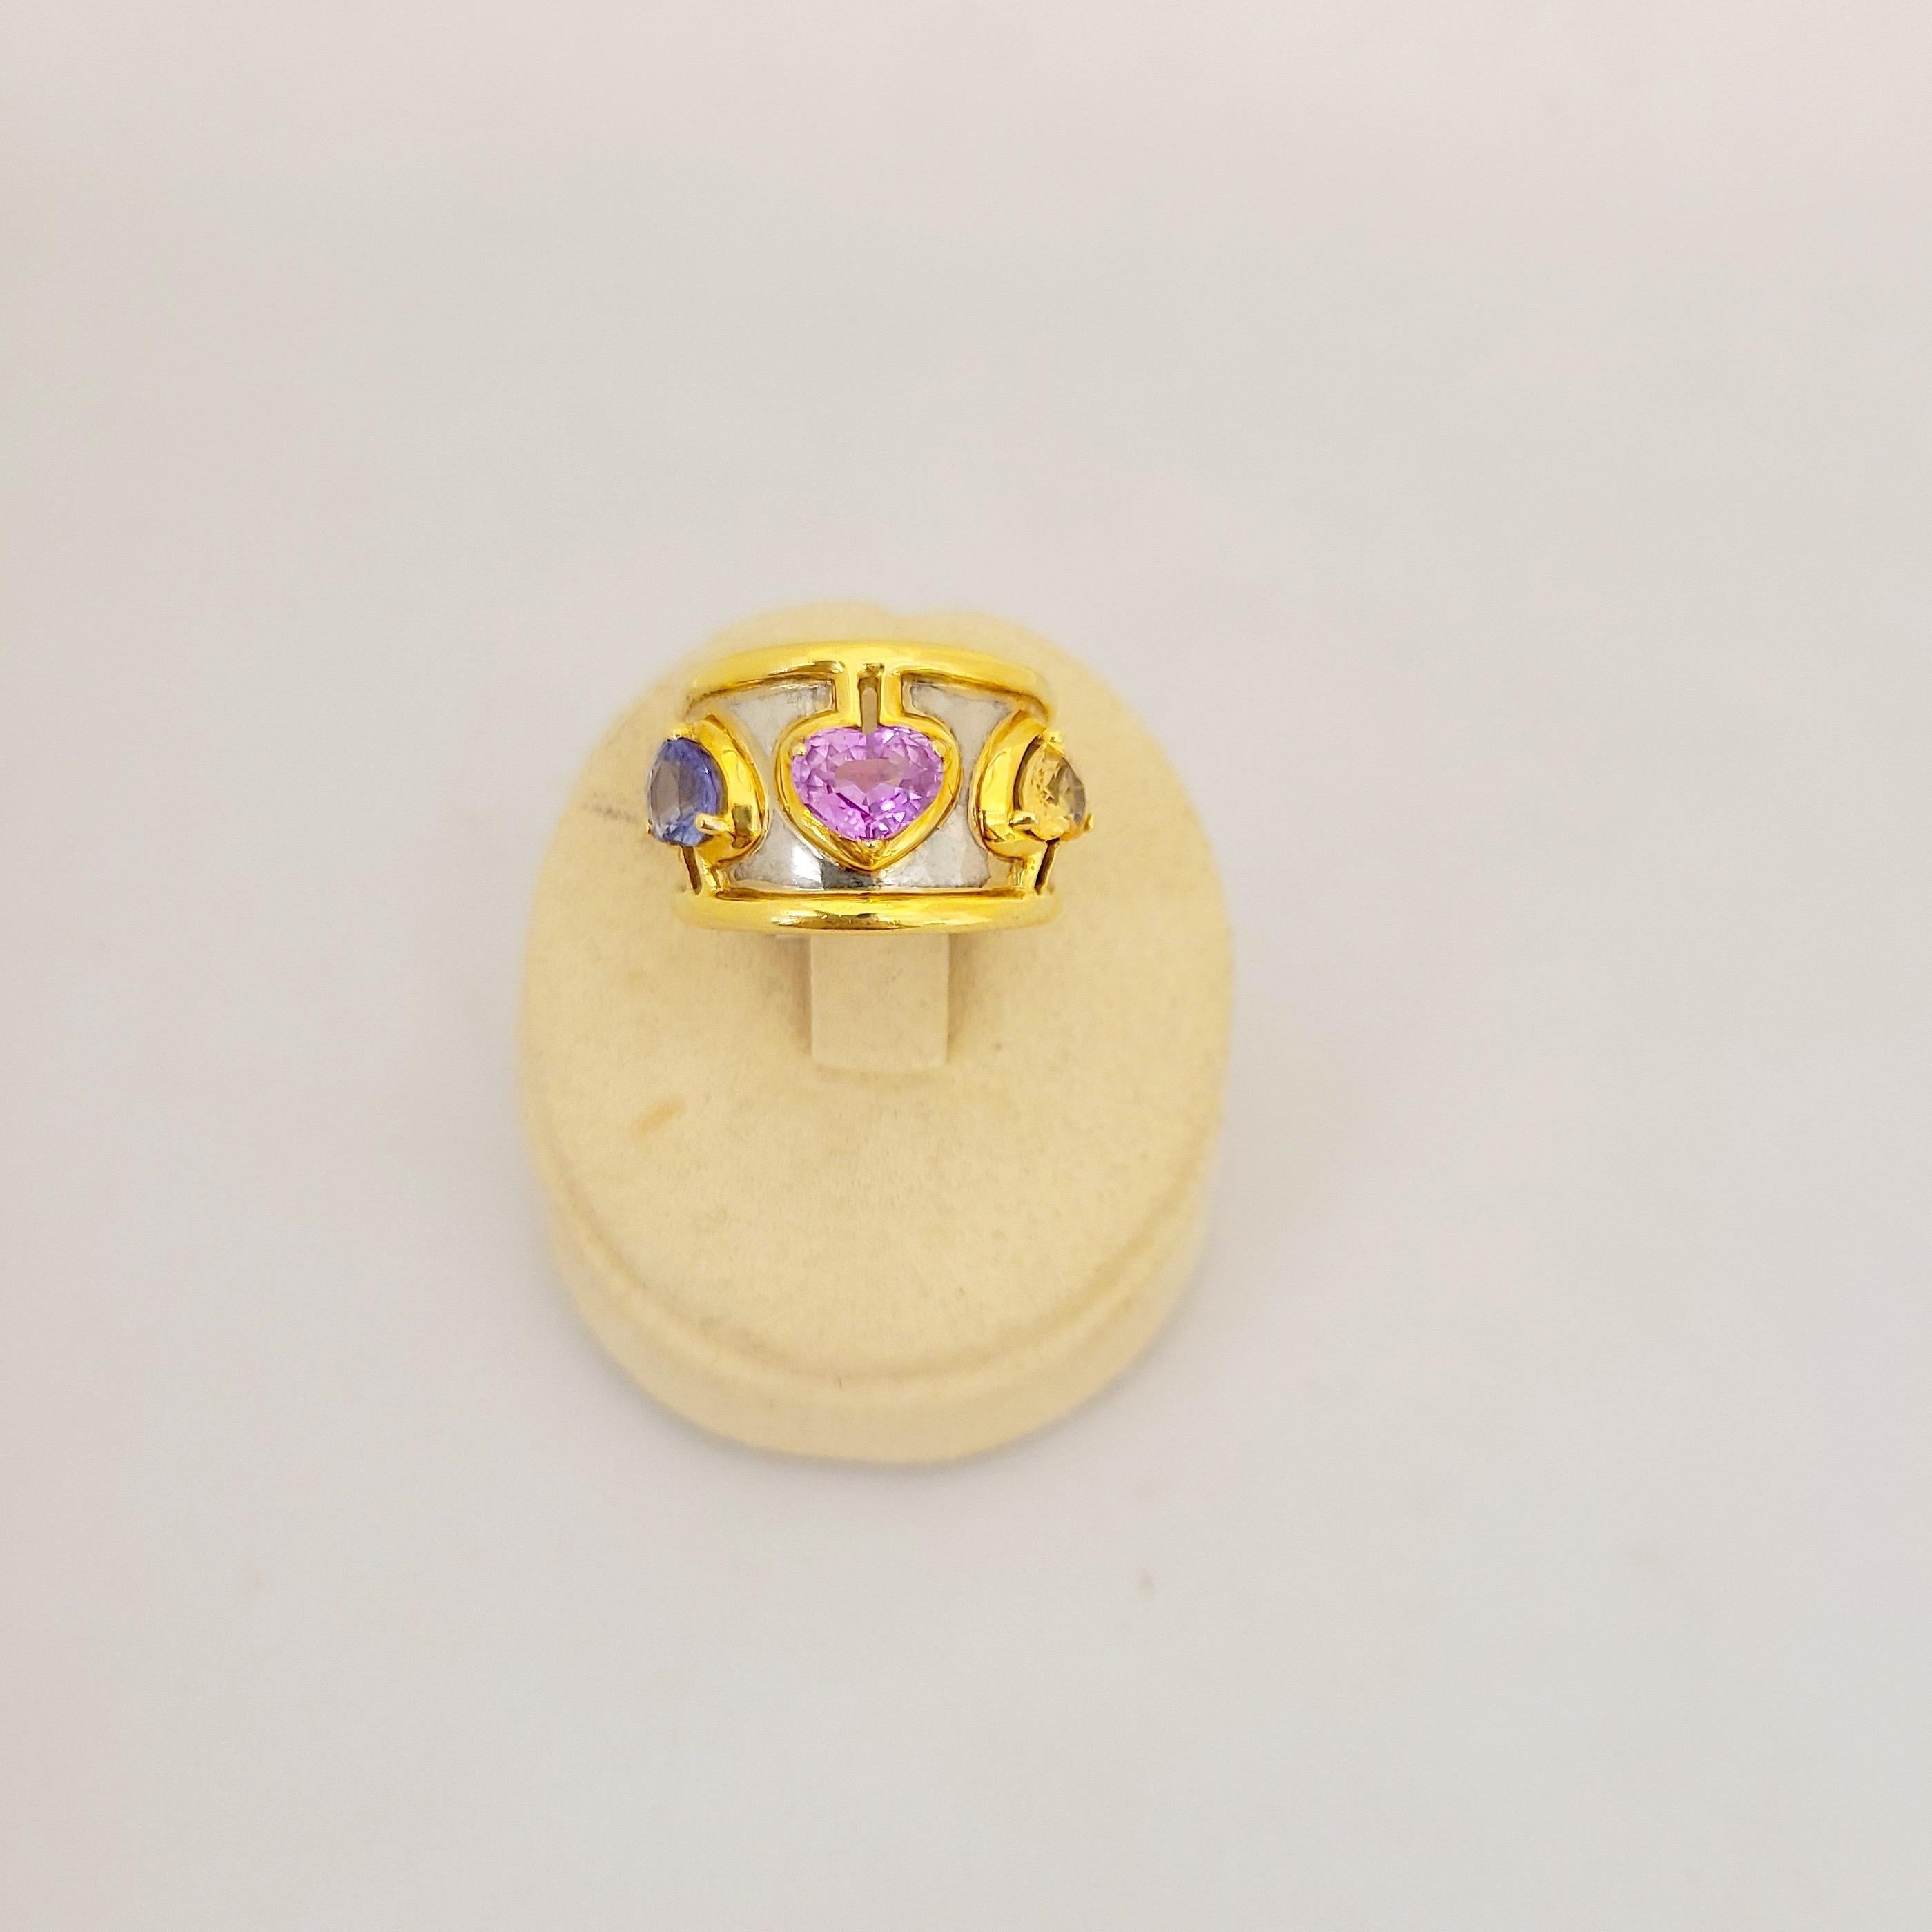 The perfect wedding band, valentine gift, or just happy for everyday, this 18 Karat Yellow and white Gold band features Yellow, Pink & Blue Sapphire hearts totaling 4.32Ct. 
Size 6. 
Cellini Jewelers NYC